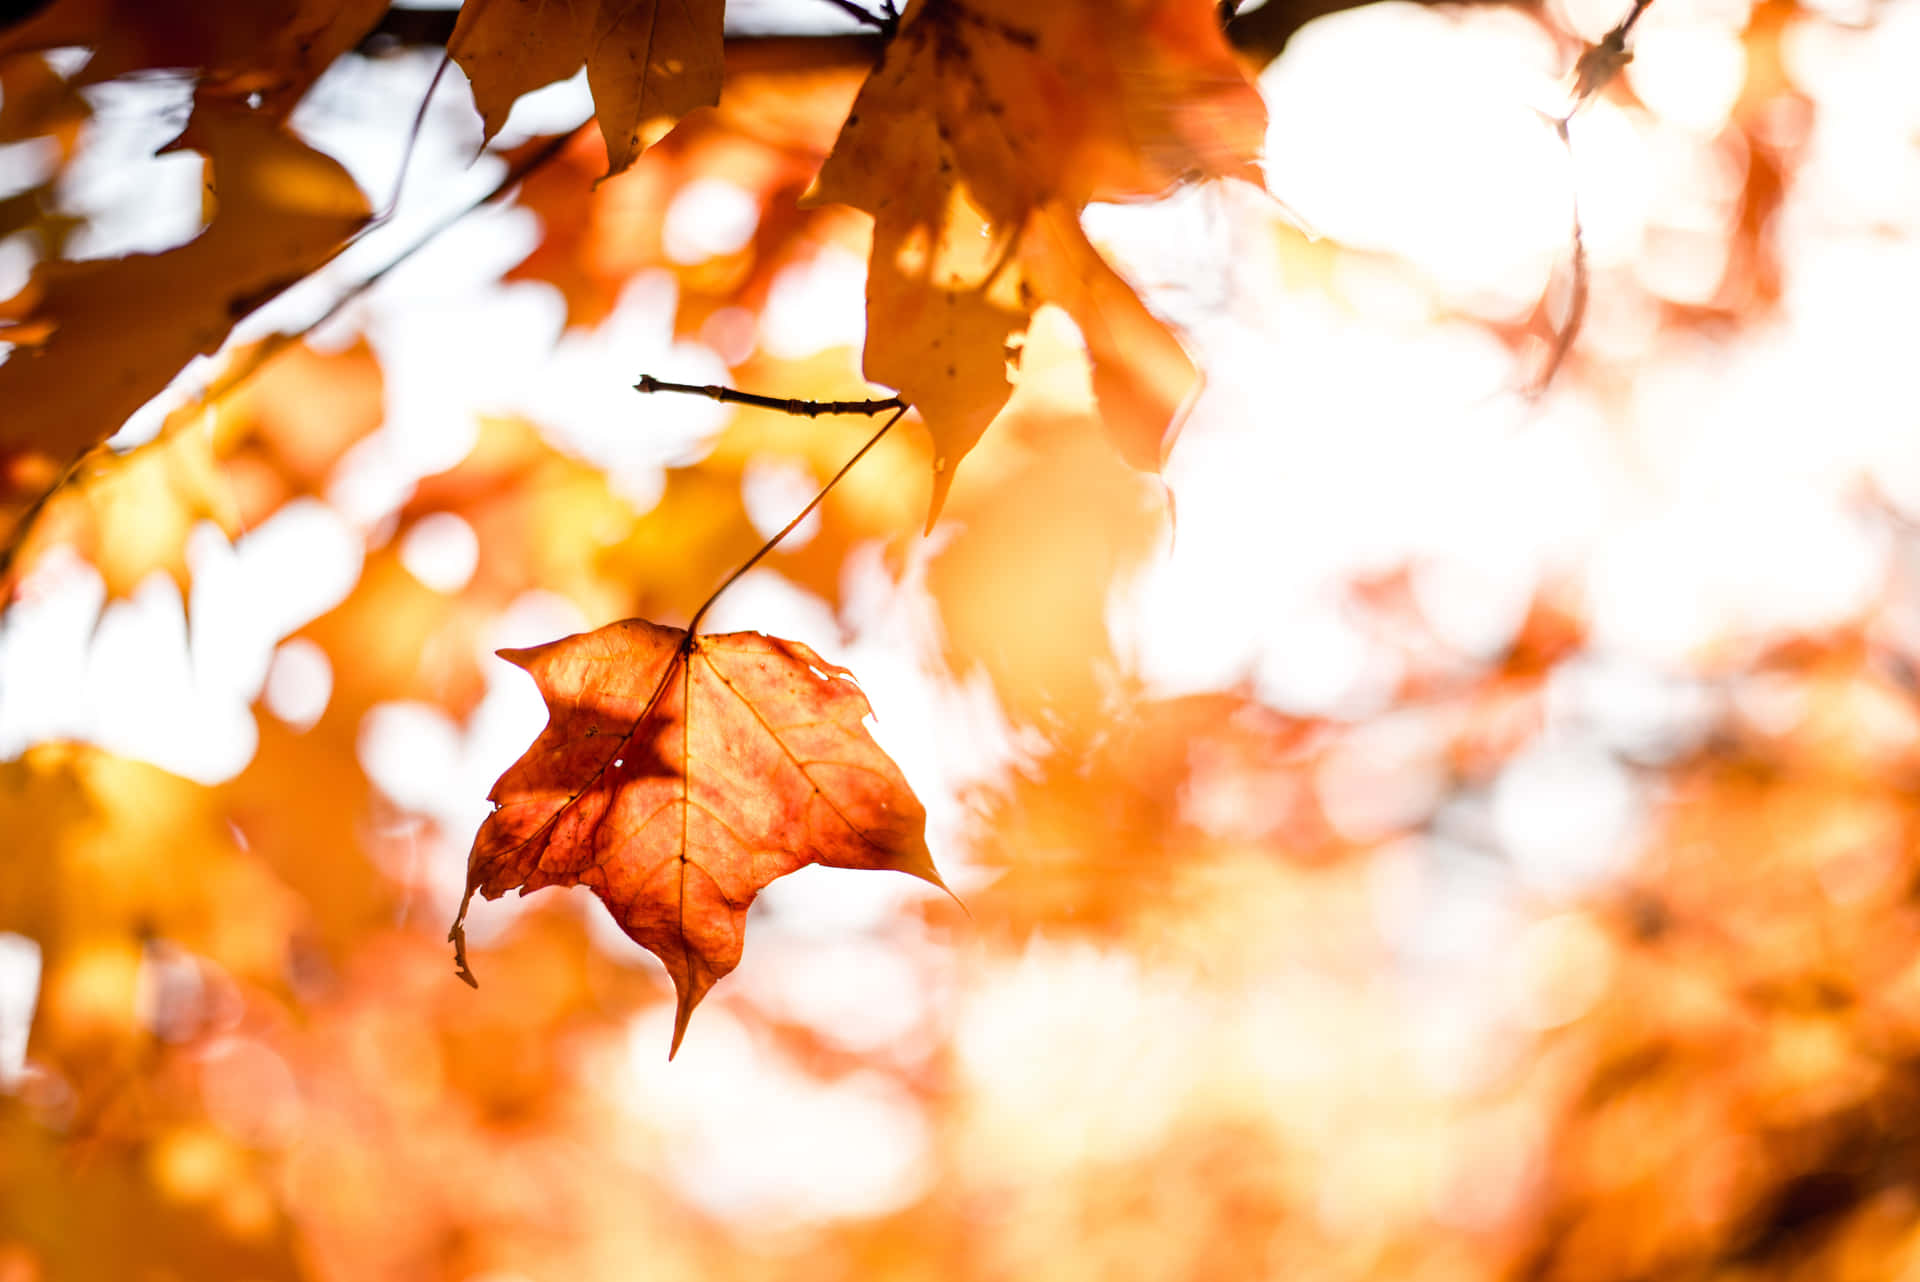 Stroll through the autumn foliage and enjoy the changing season to its fullest. Wallpaper